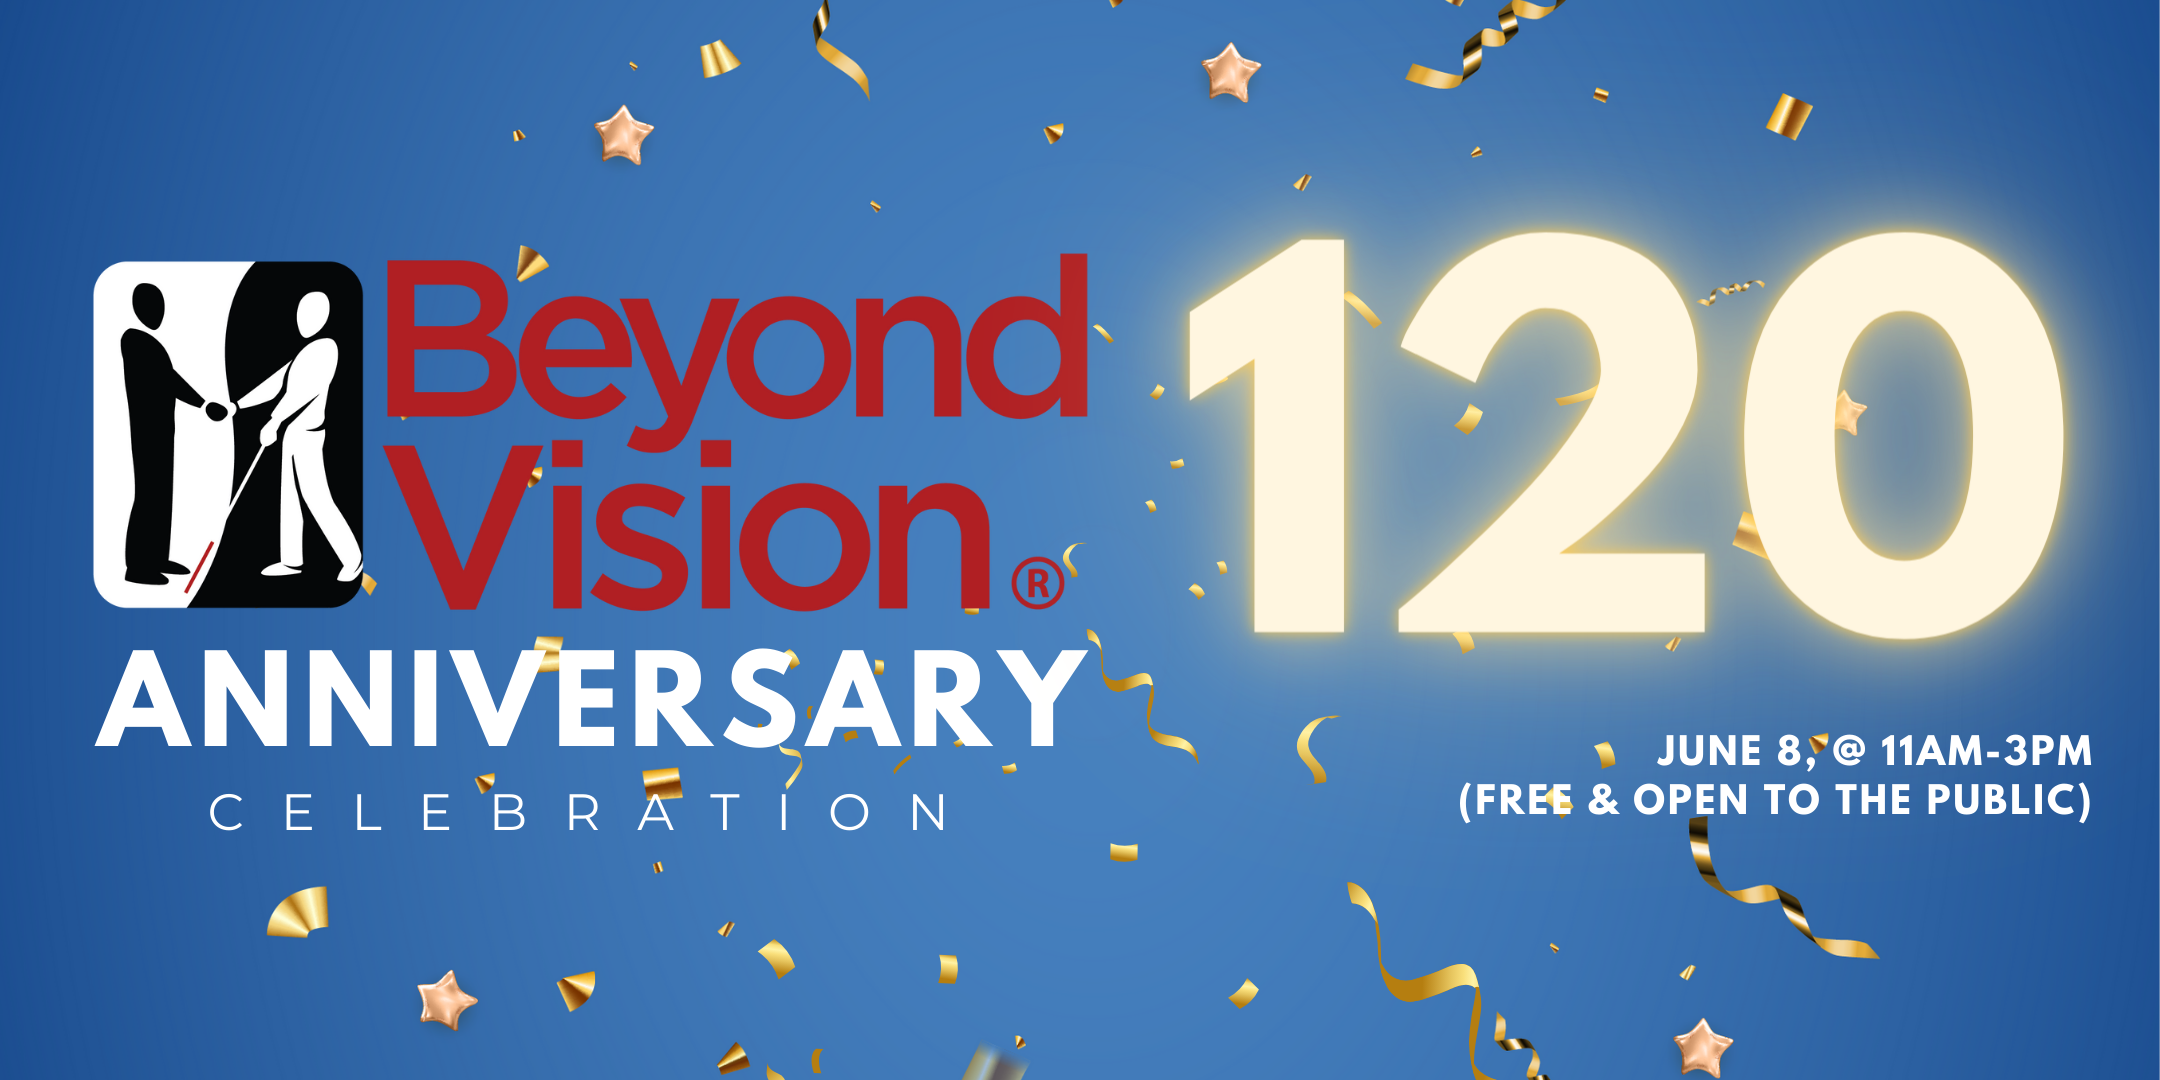 Beyond Vision 120th Anniversary Celebration. June 8th @ 11am - 3pm. Free and open to the public.